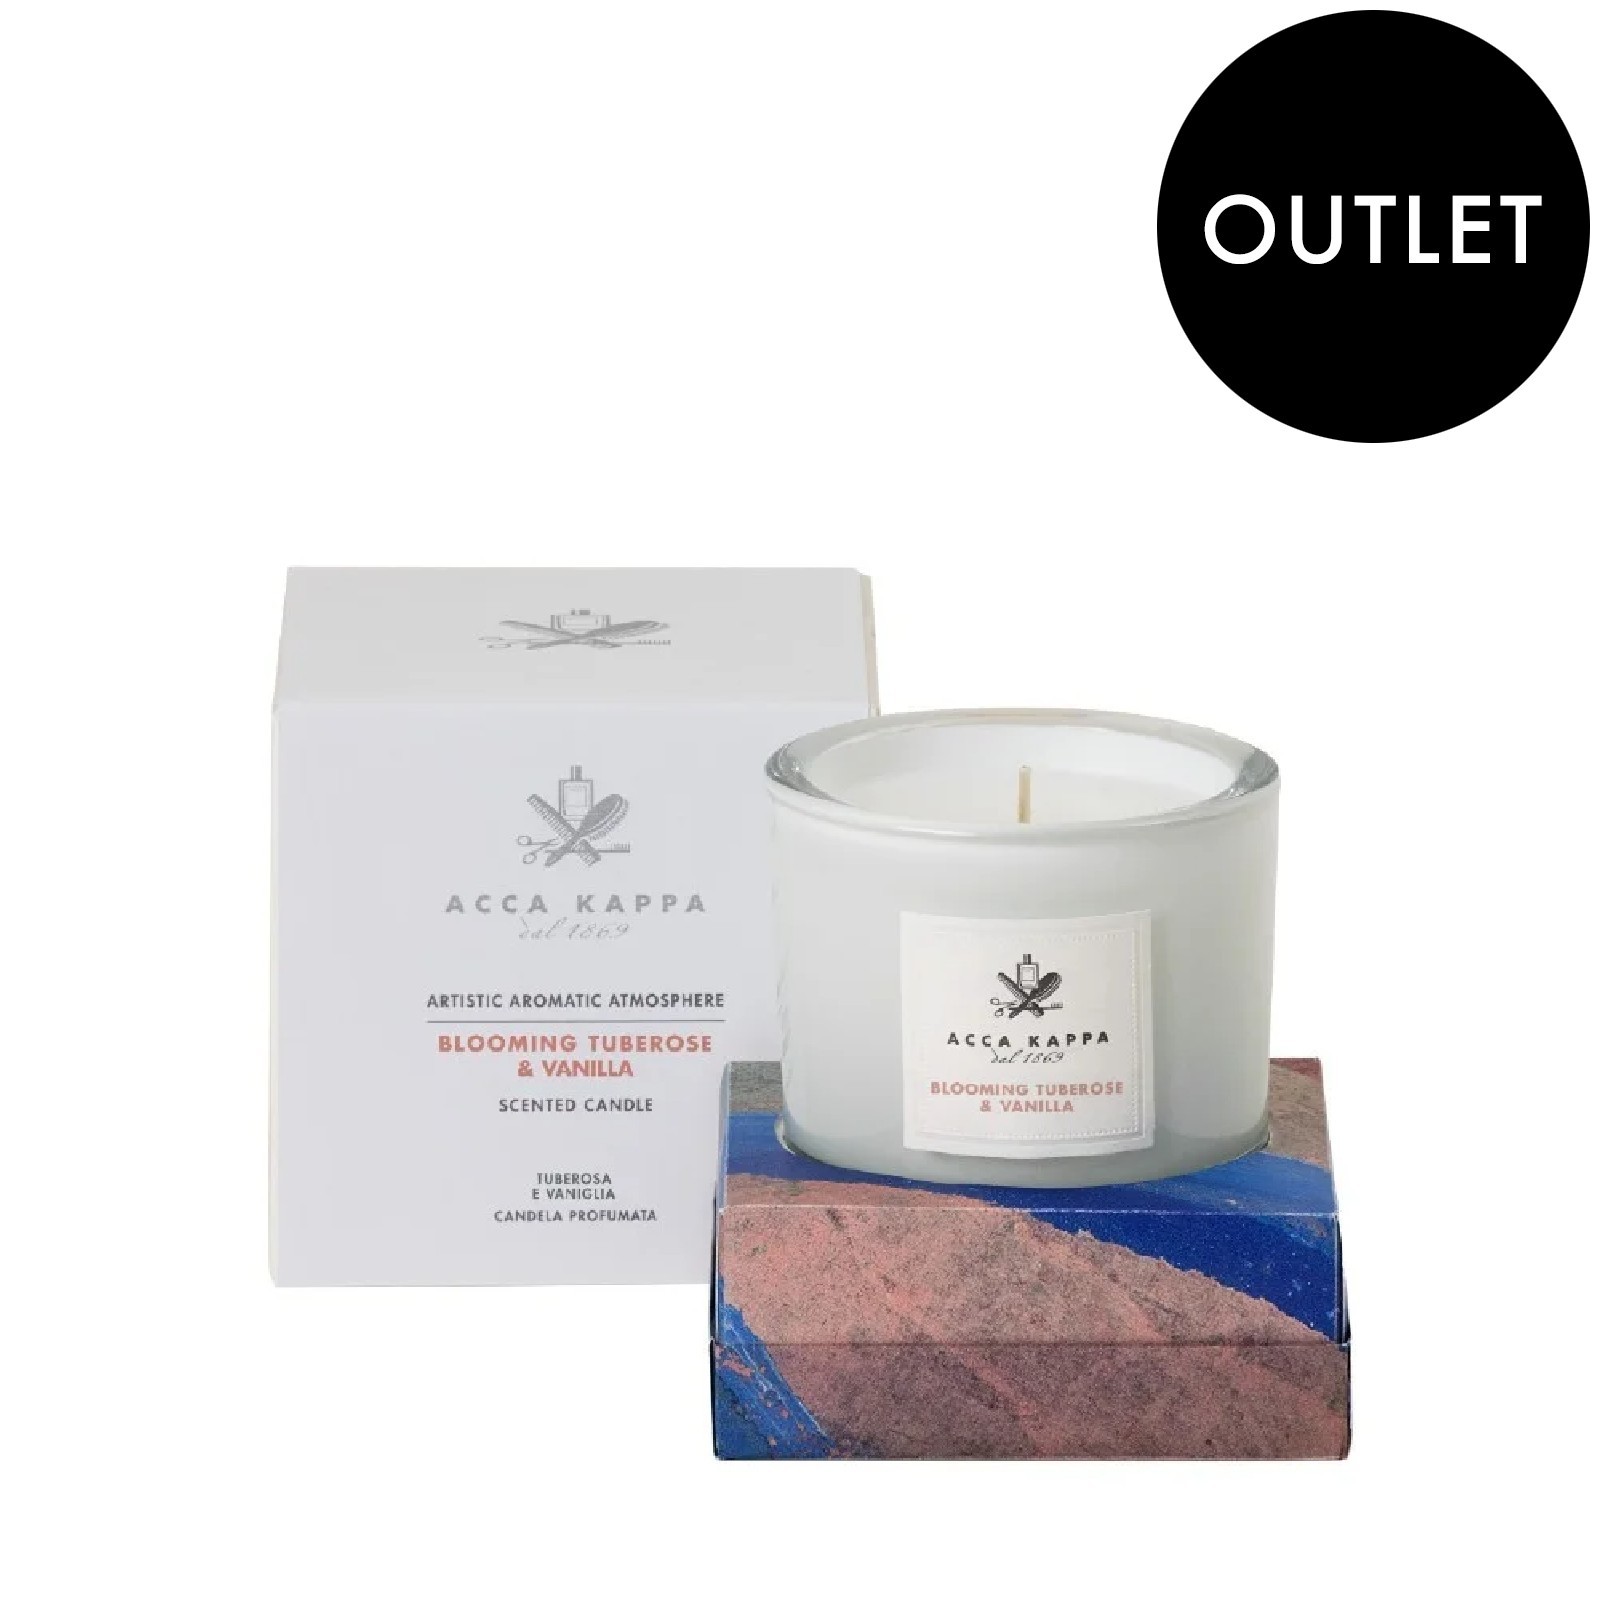 ACCA KAPPA Blooming Tuberose & Vanilla Scented Candle 180g outlet